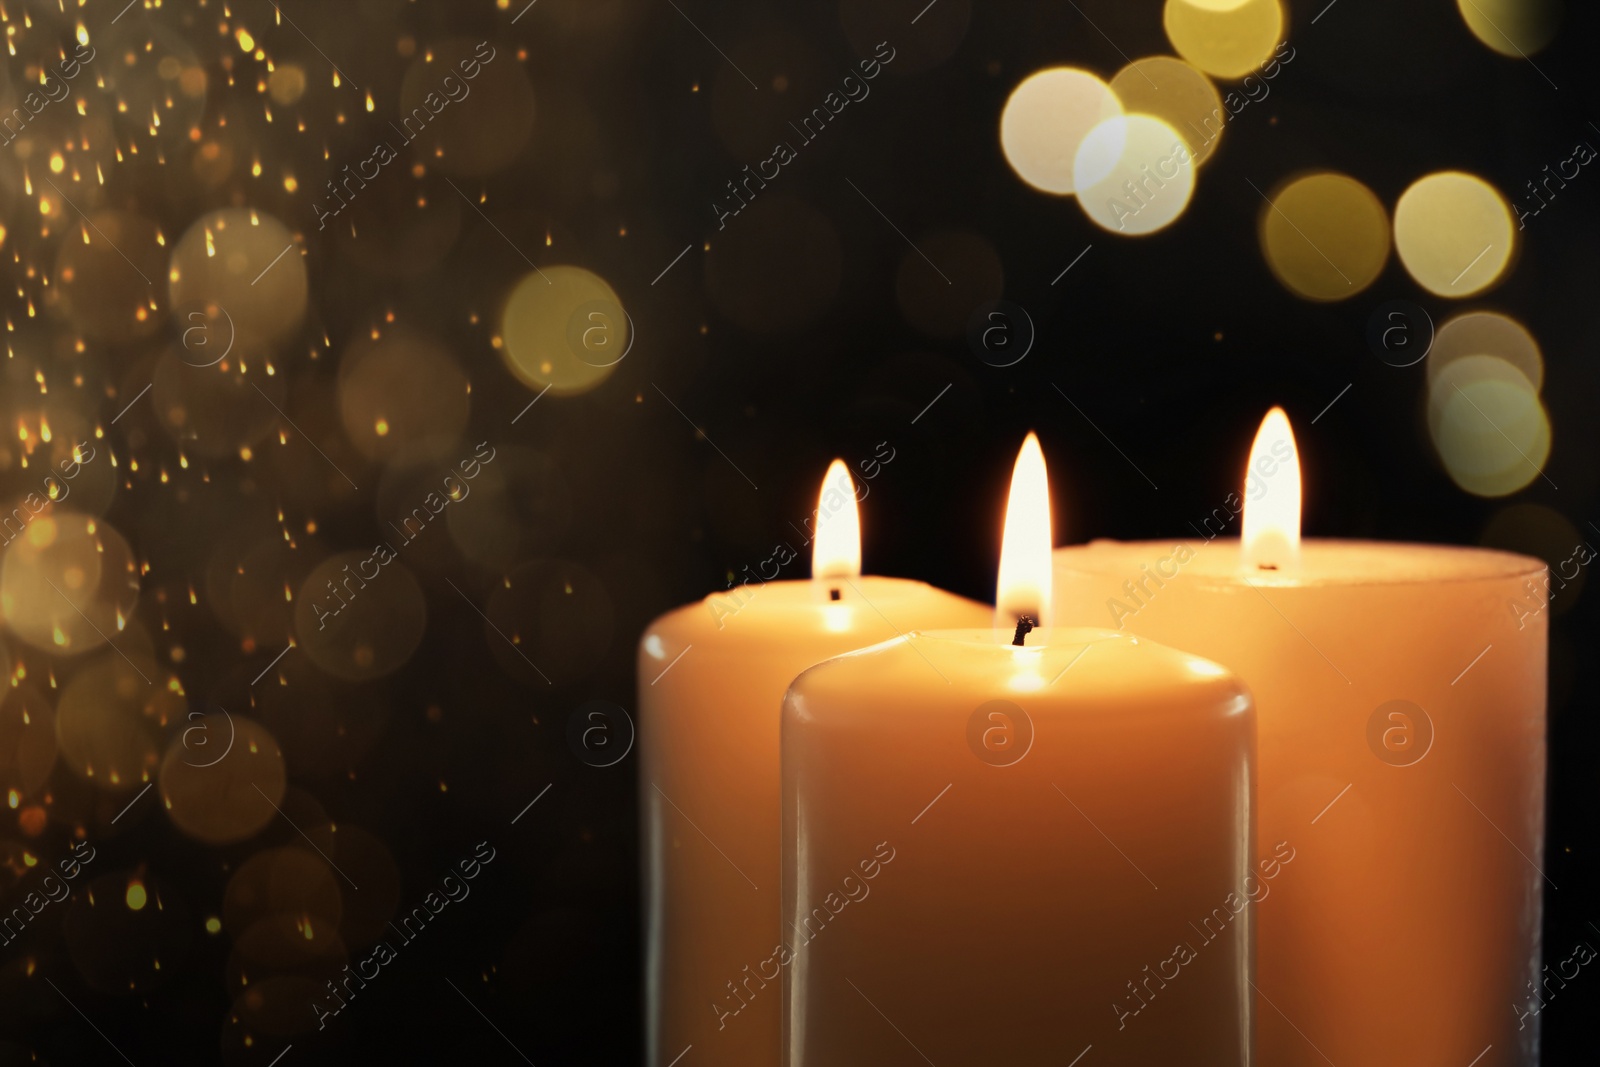 Image of Wax candles burning on black background with blurred lights, closeup. Bokeh effect